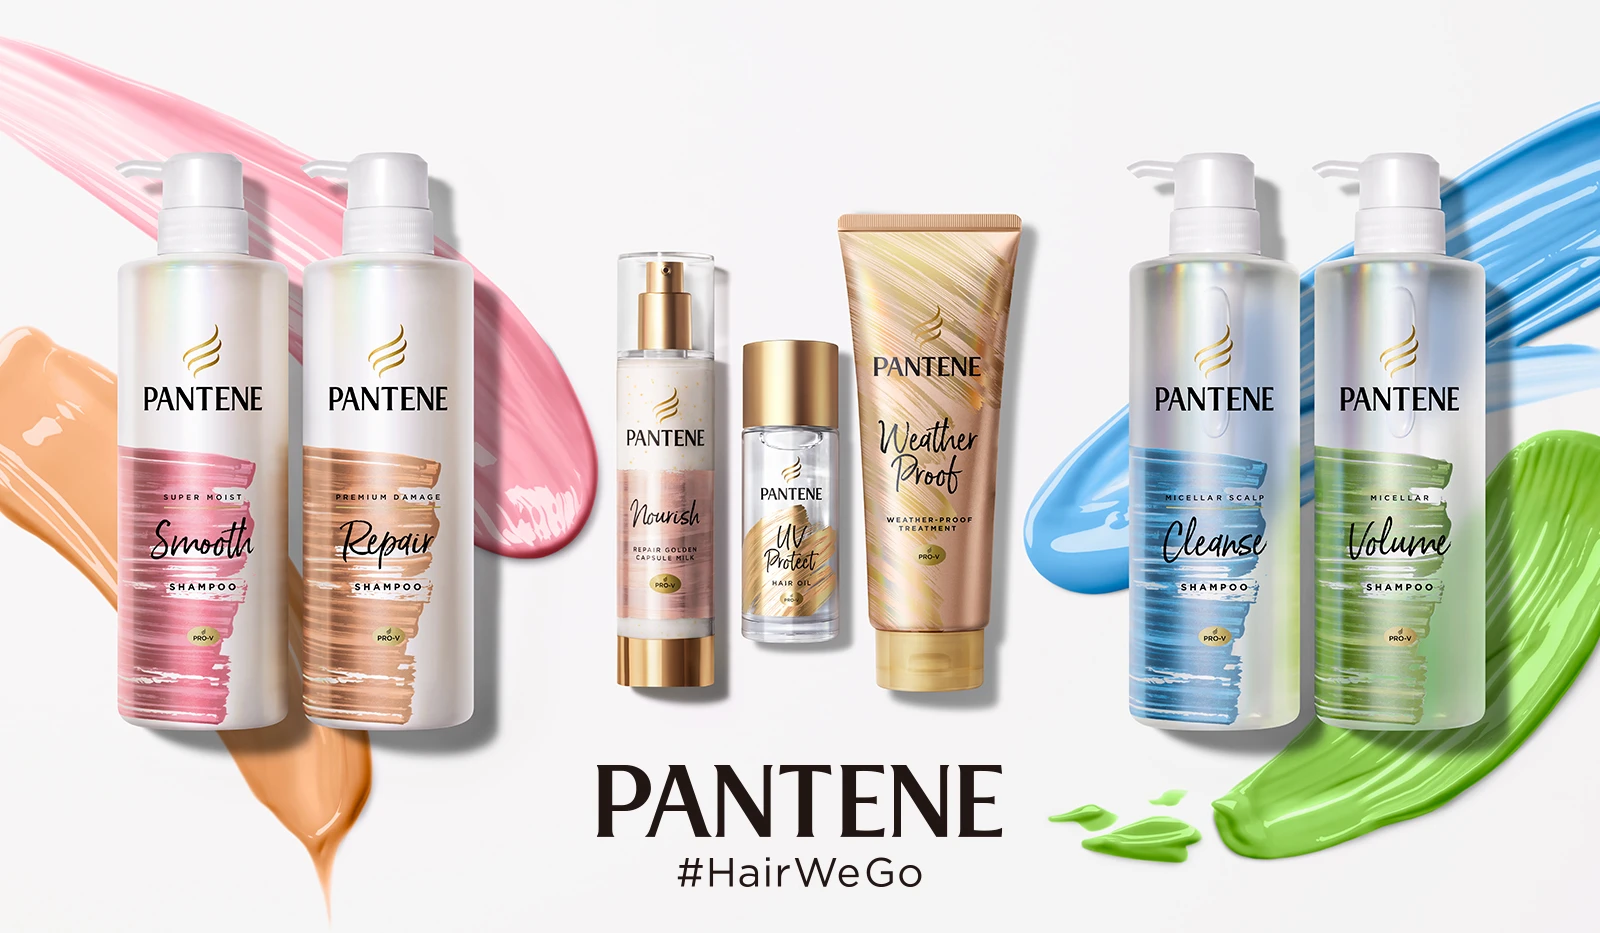 Pantene products